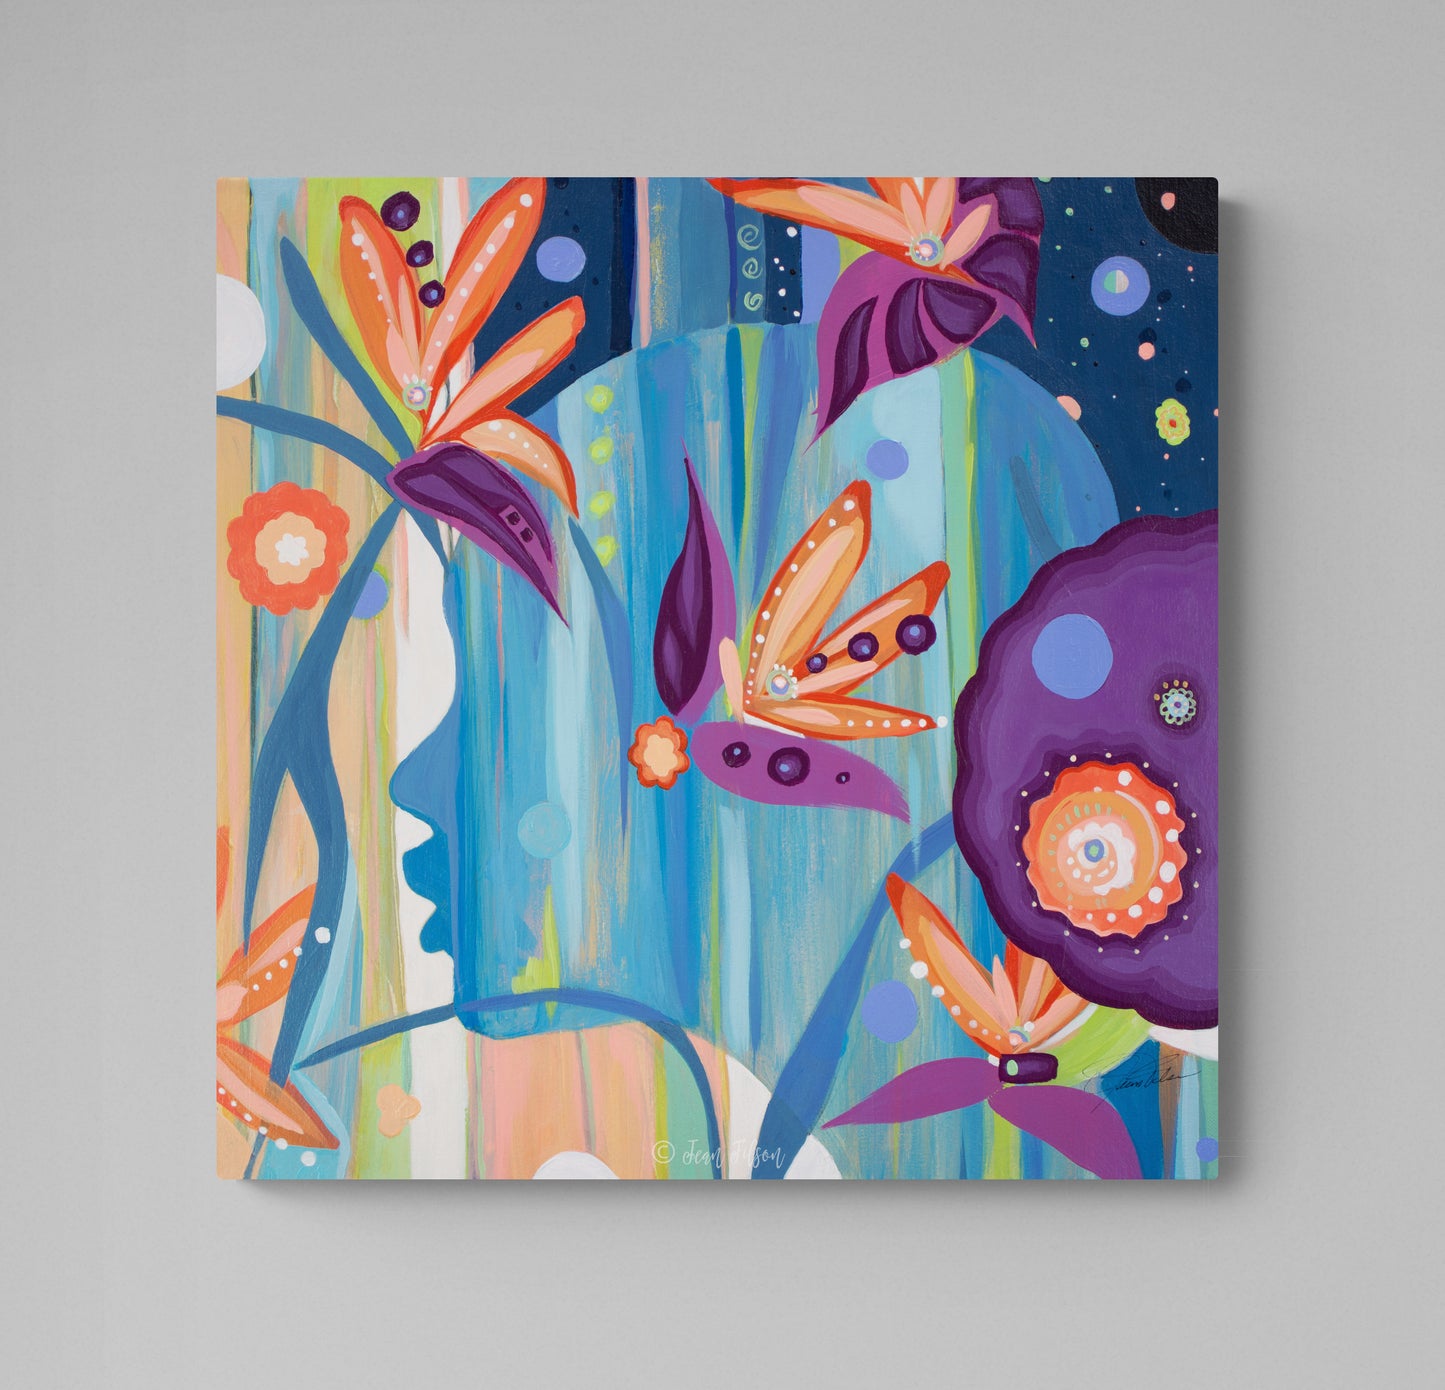 THE INTROVERT, Original abstract canvas painting for sale, Abstract Art floral, Abstract face